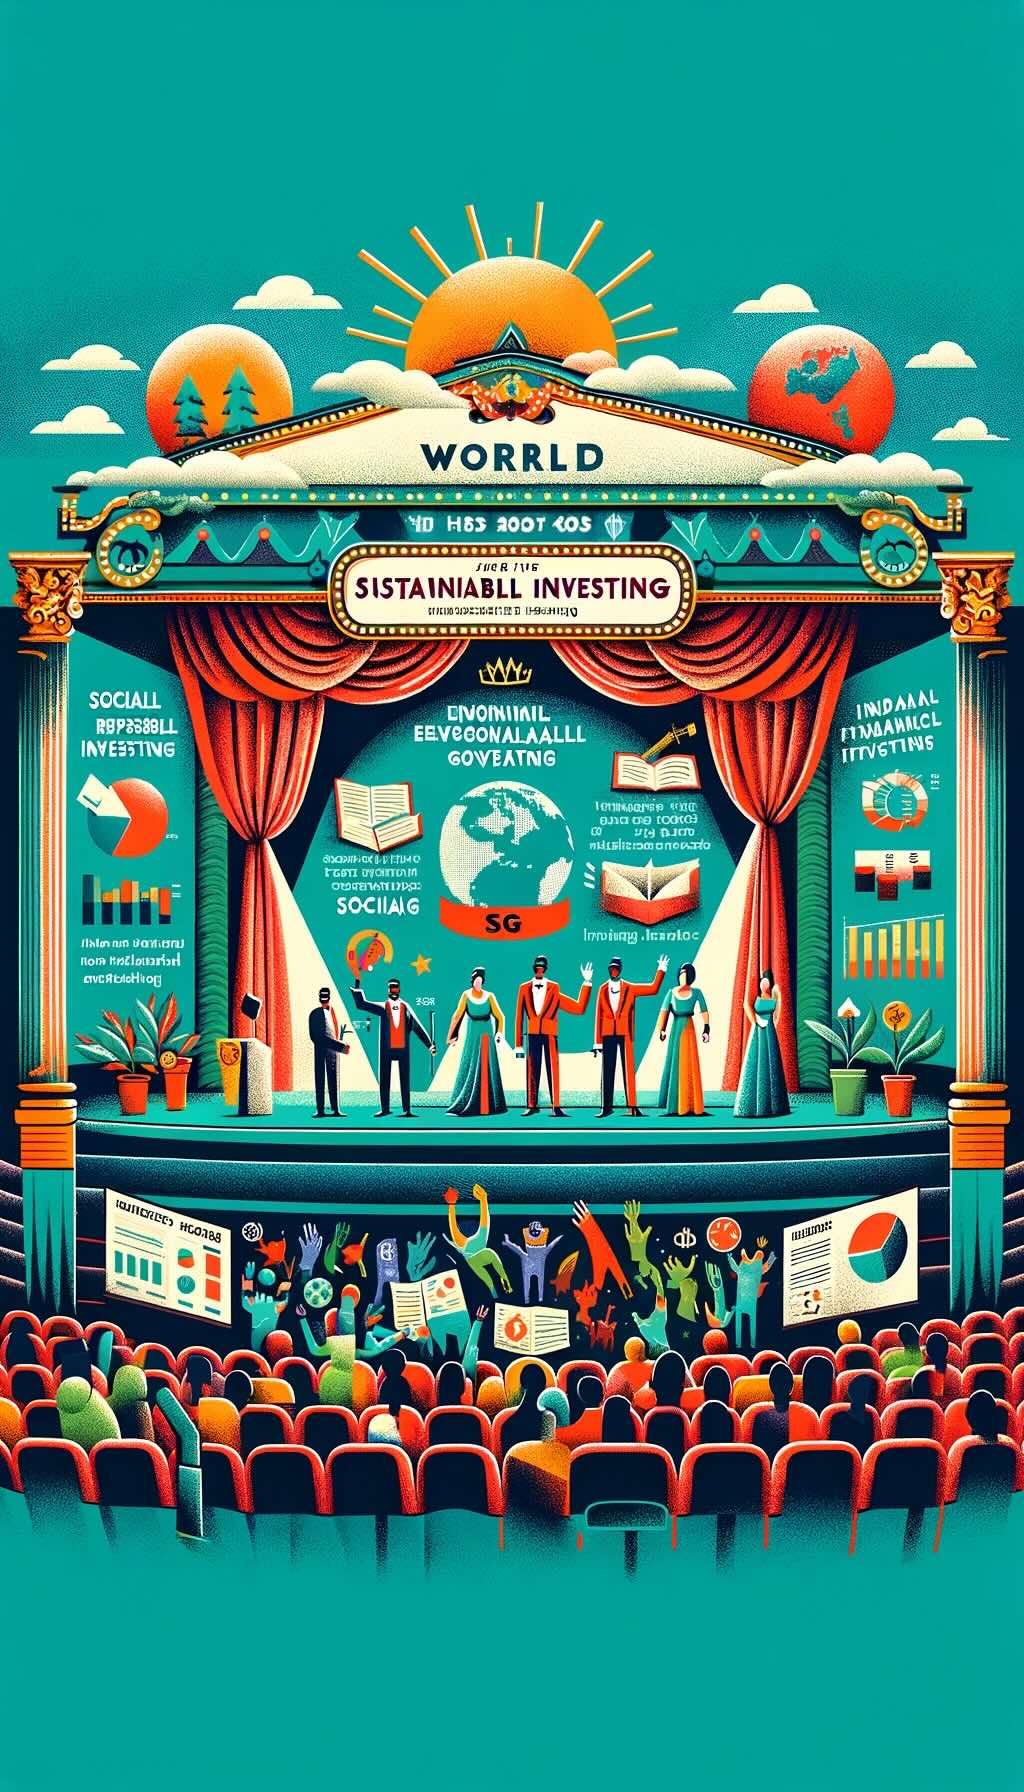 Theater of sustainable investing, showcasing Socially Responsible Investing (SRI), Environmental, Social, and Governance (ESG) investing, and Impact Investing as key players on stage. Each character, adorned in distinct costumes, represents their unique roles within sustainable investing. SRI, as the veteran actor, follows a strict ethical script, ESG, the skilled improviser, integrates multifaceted factors into financial analysis, and Impact Investing, the star performer, aims for financial returns, social impact, and environmental benefits. Props and stage elements such as scripts, financial charts, globes, and trees enrich the scene, highlighting the strategies' interconnectedness and significance. The backdrop depicts a vibrant, progressive world, underscoring the potential for growth and positive change through these investment approaches. 